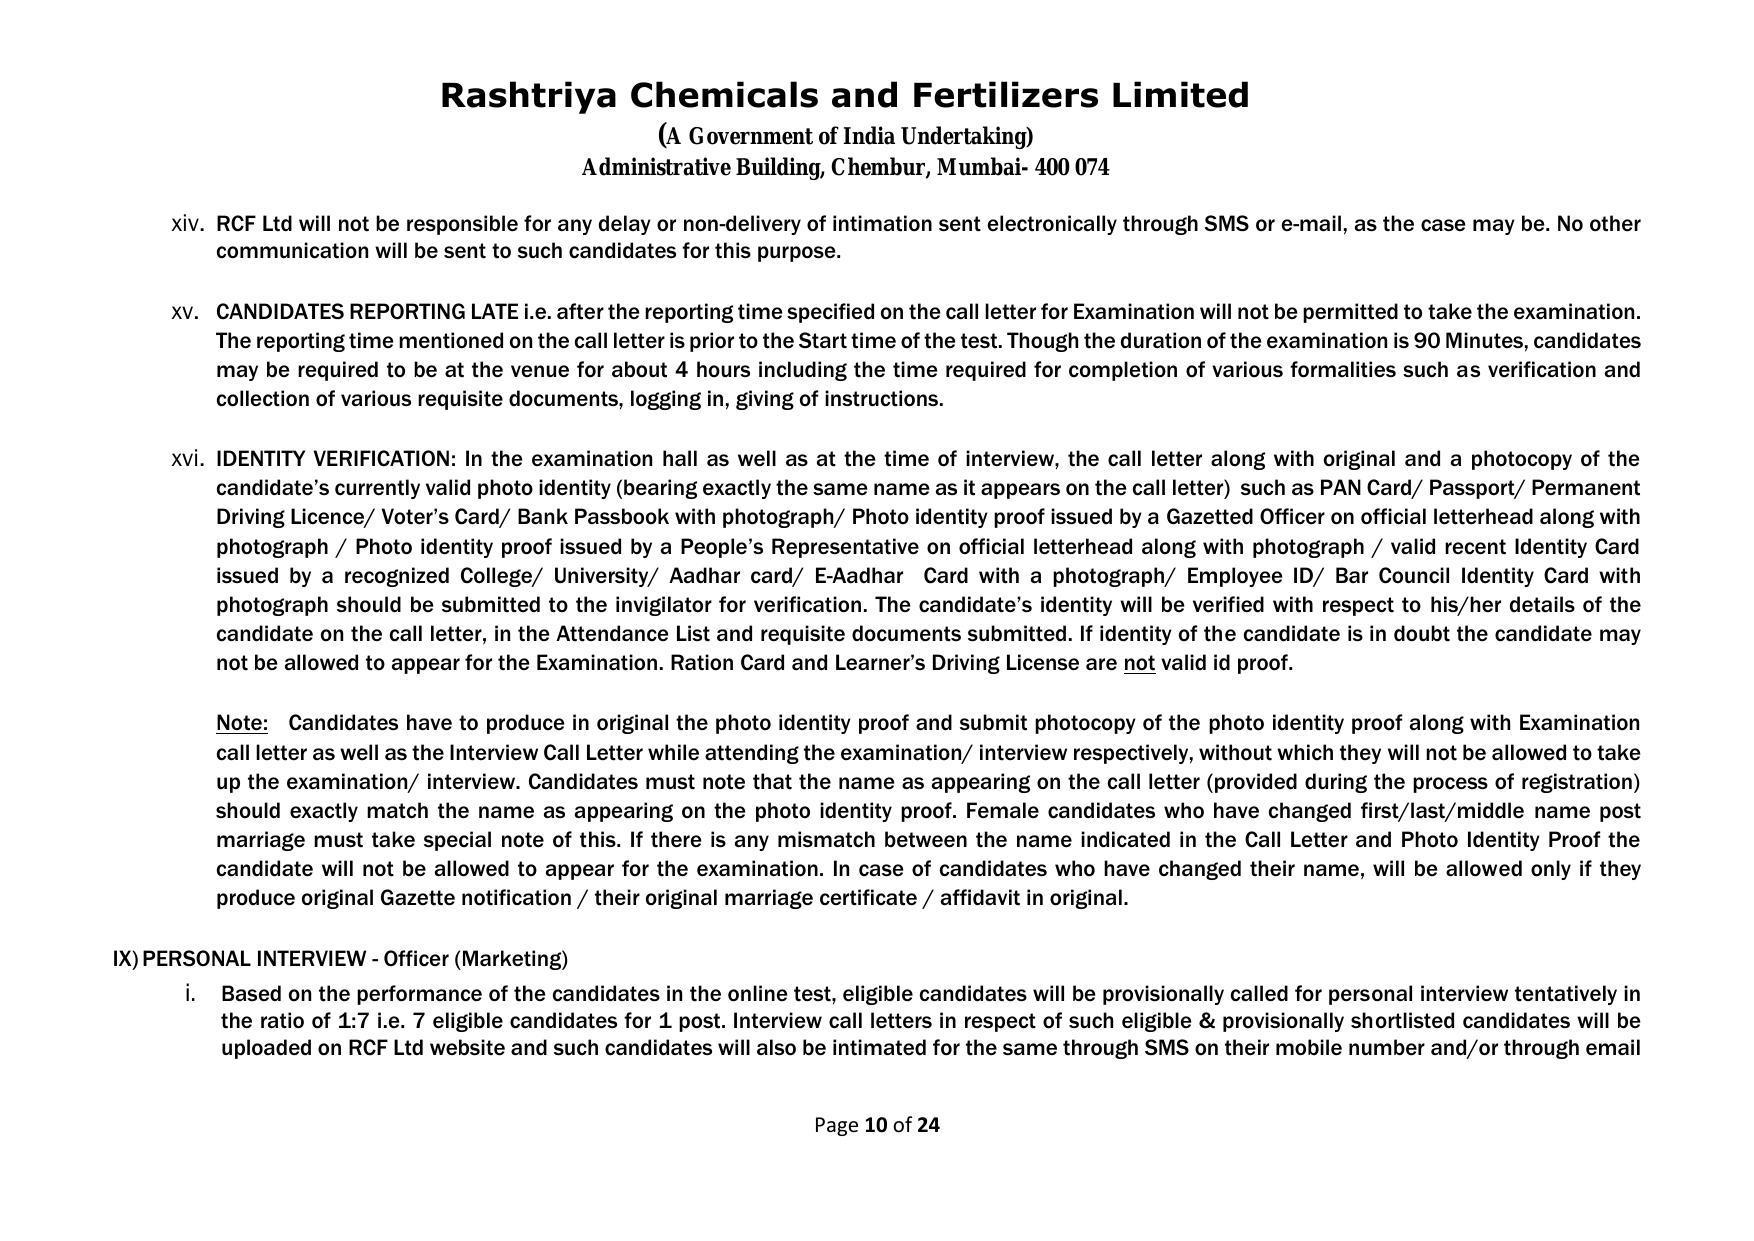 Rashtriya Chemicals & Fertilizers Limited Invites Application for 18 Officer (Marketing) Recruitment 2023 - Page 9